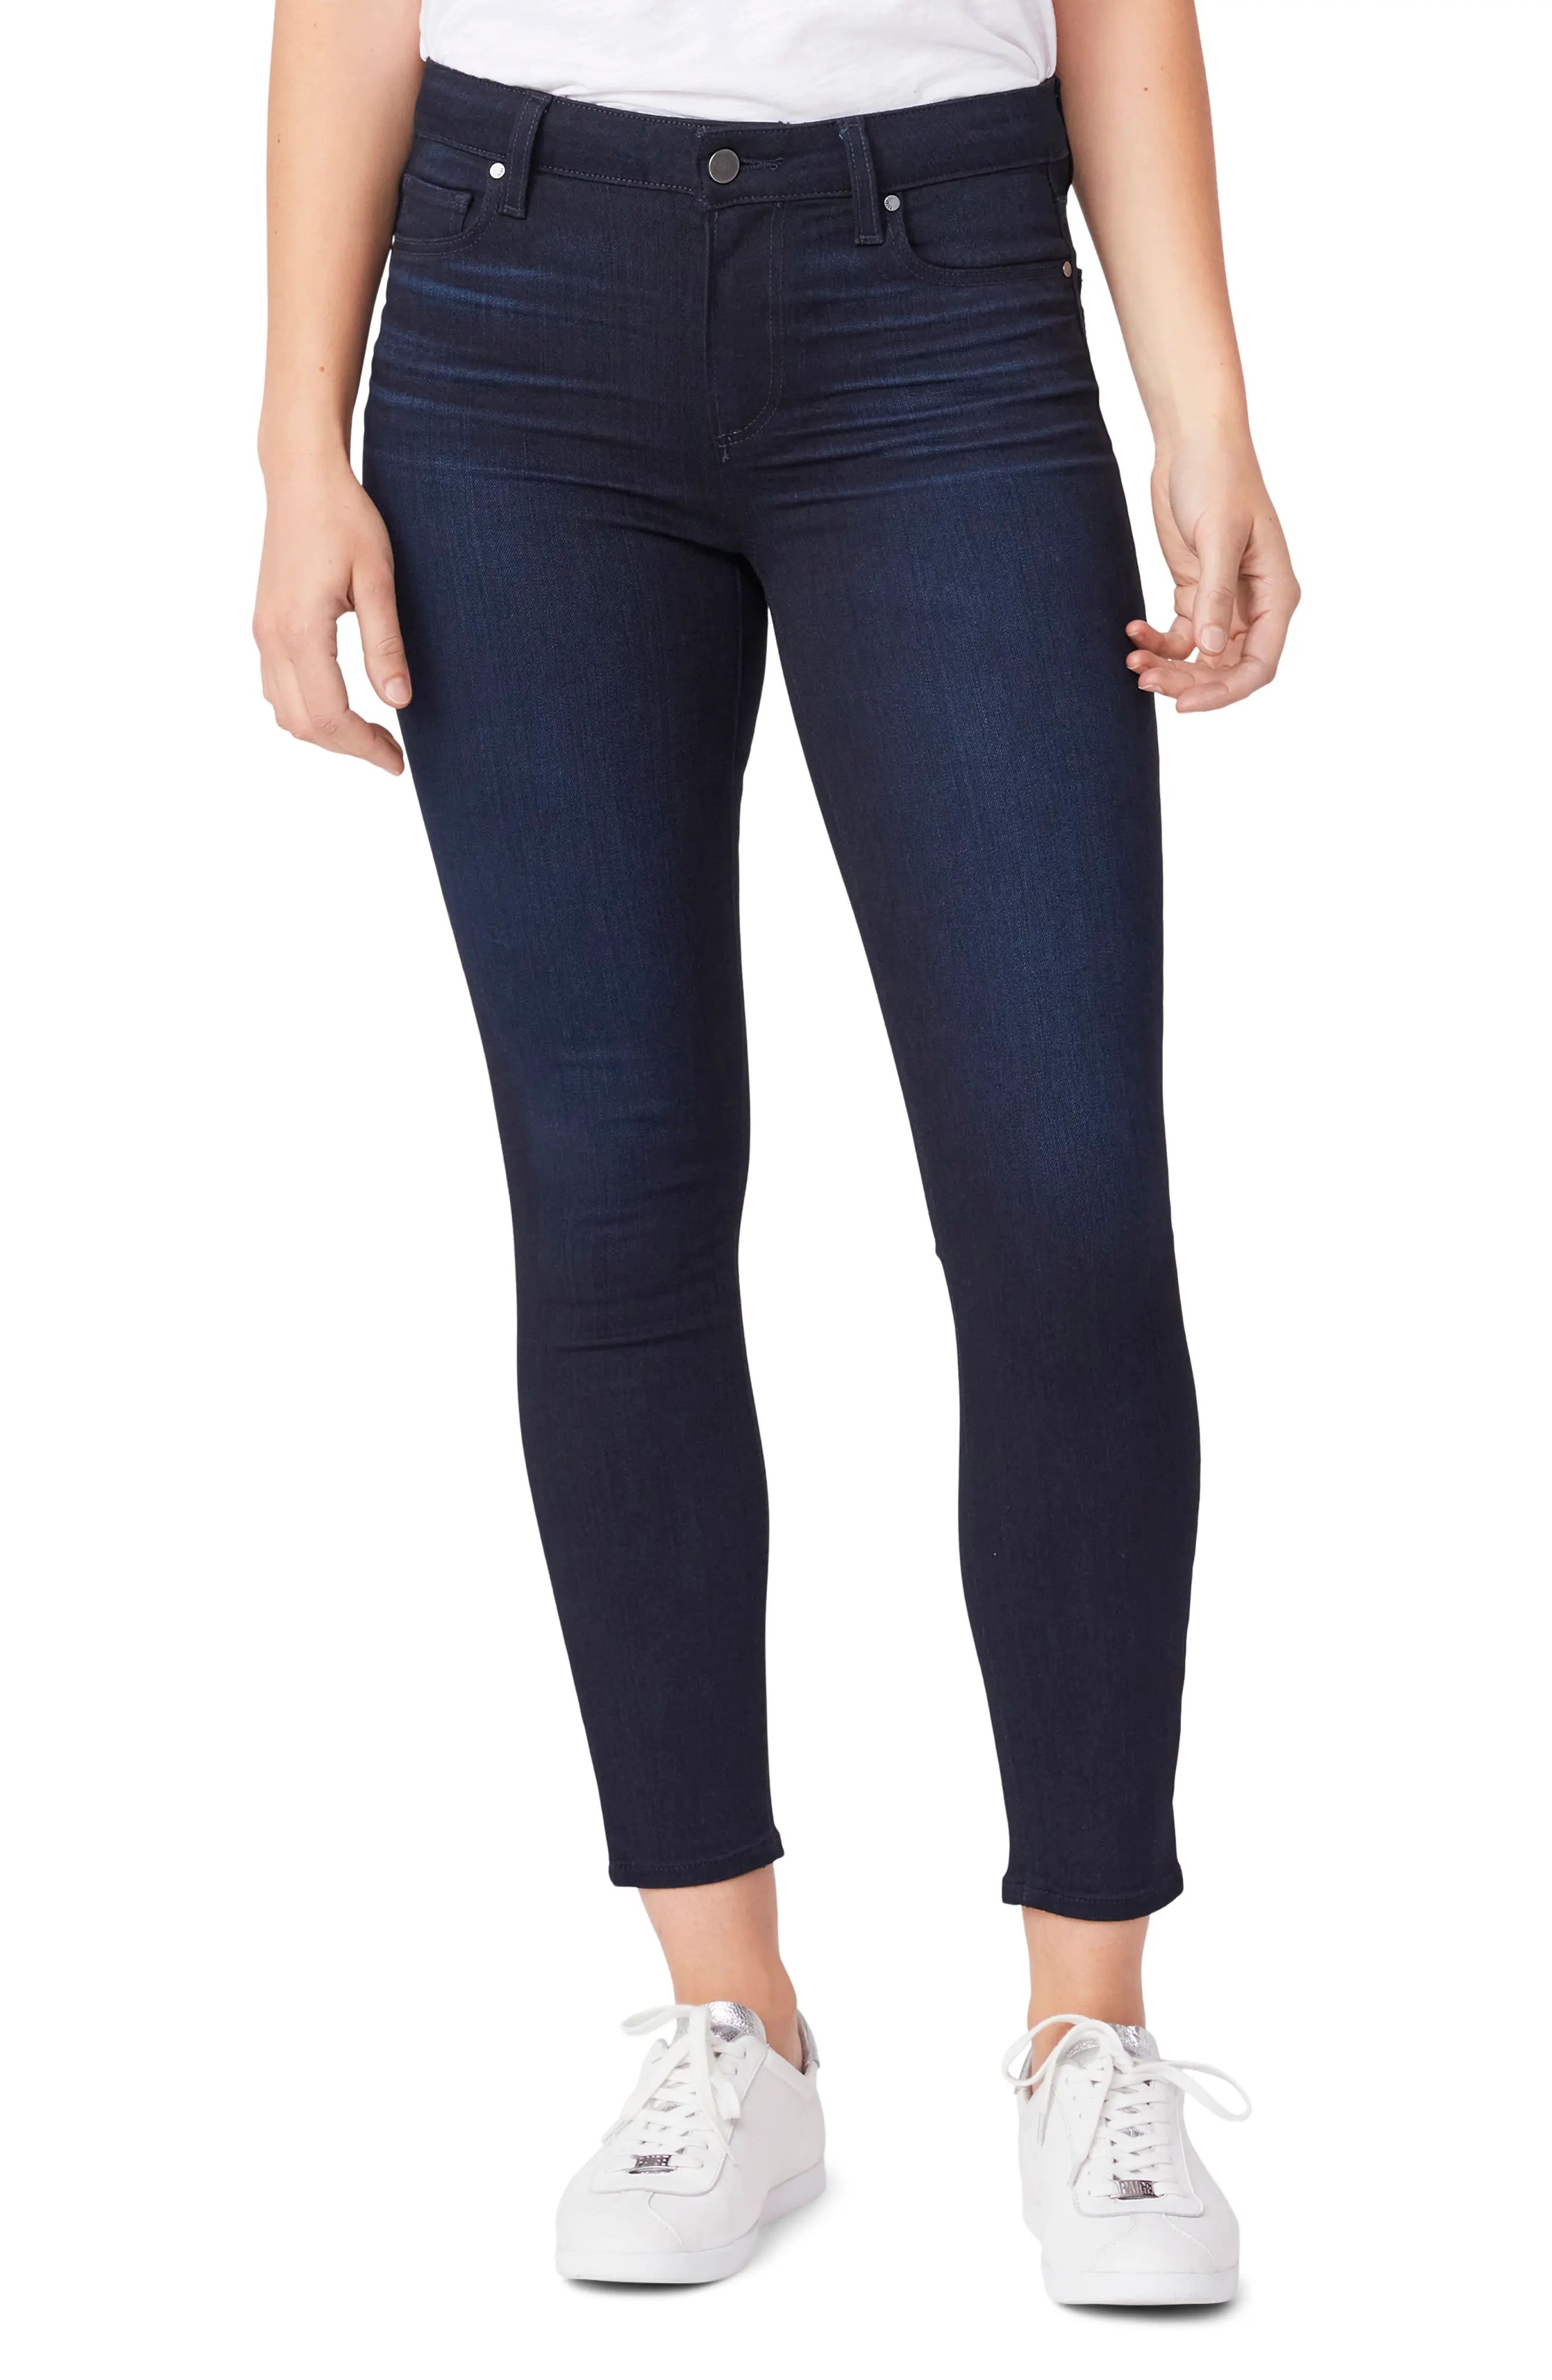 PAIGE Verdugo High Waist Crop Skinny Jeans in Seas at Nordstrom, Size 23 | Nordstrom